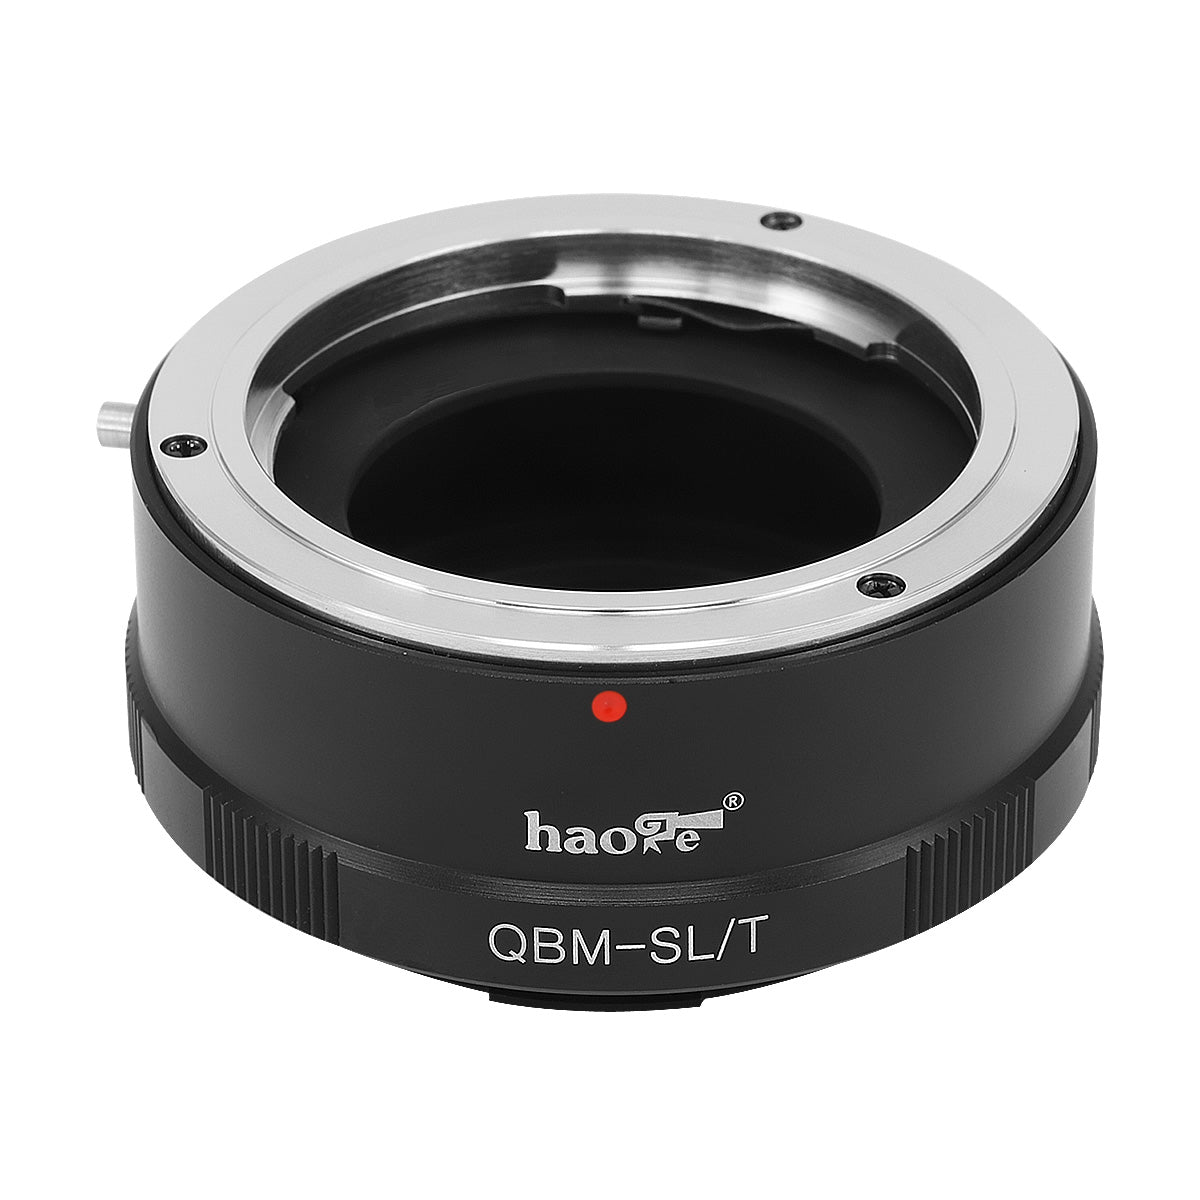 Haoge Manual Lens Mount Adapter for Rollei 35 SL35 QBM Quick Bayonet Mount Lens to Leica L Mount Camera Such as T, Typ701, TL, TL2, CL (2017), SL, Typ 601, Typ601, Panasonic S1 / S1R / S1H, Sigma fp